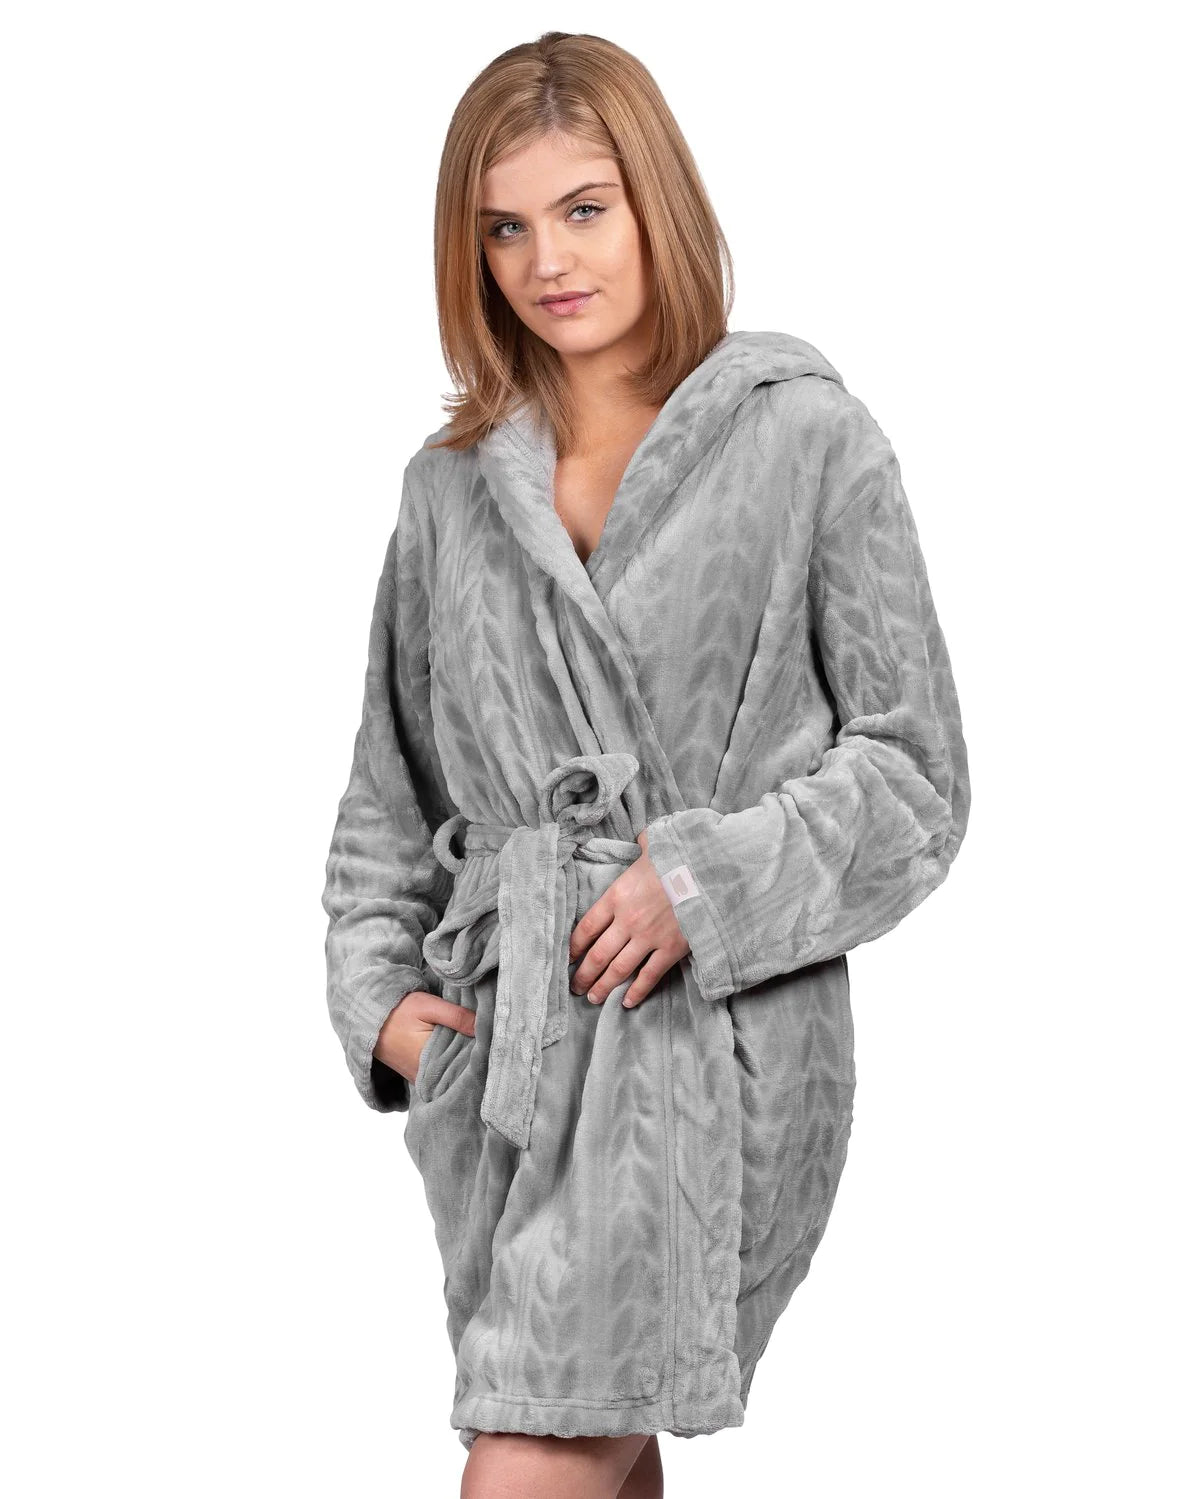 Personalized Hooded Plush Robe - Grey